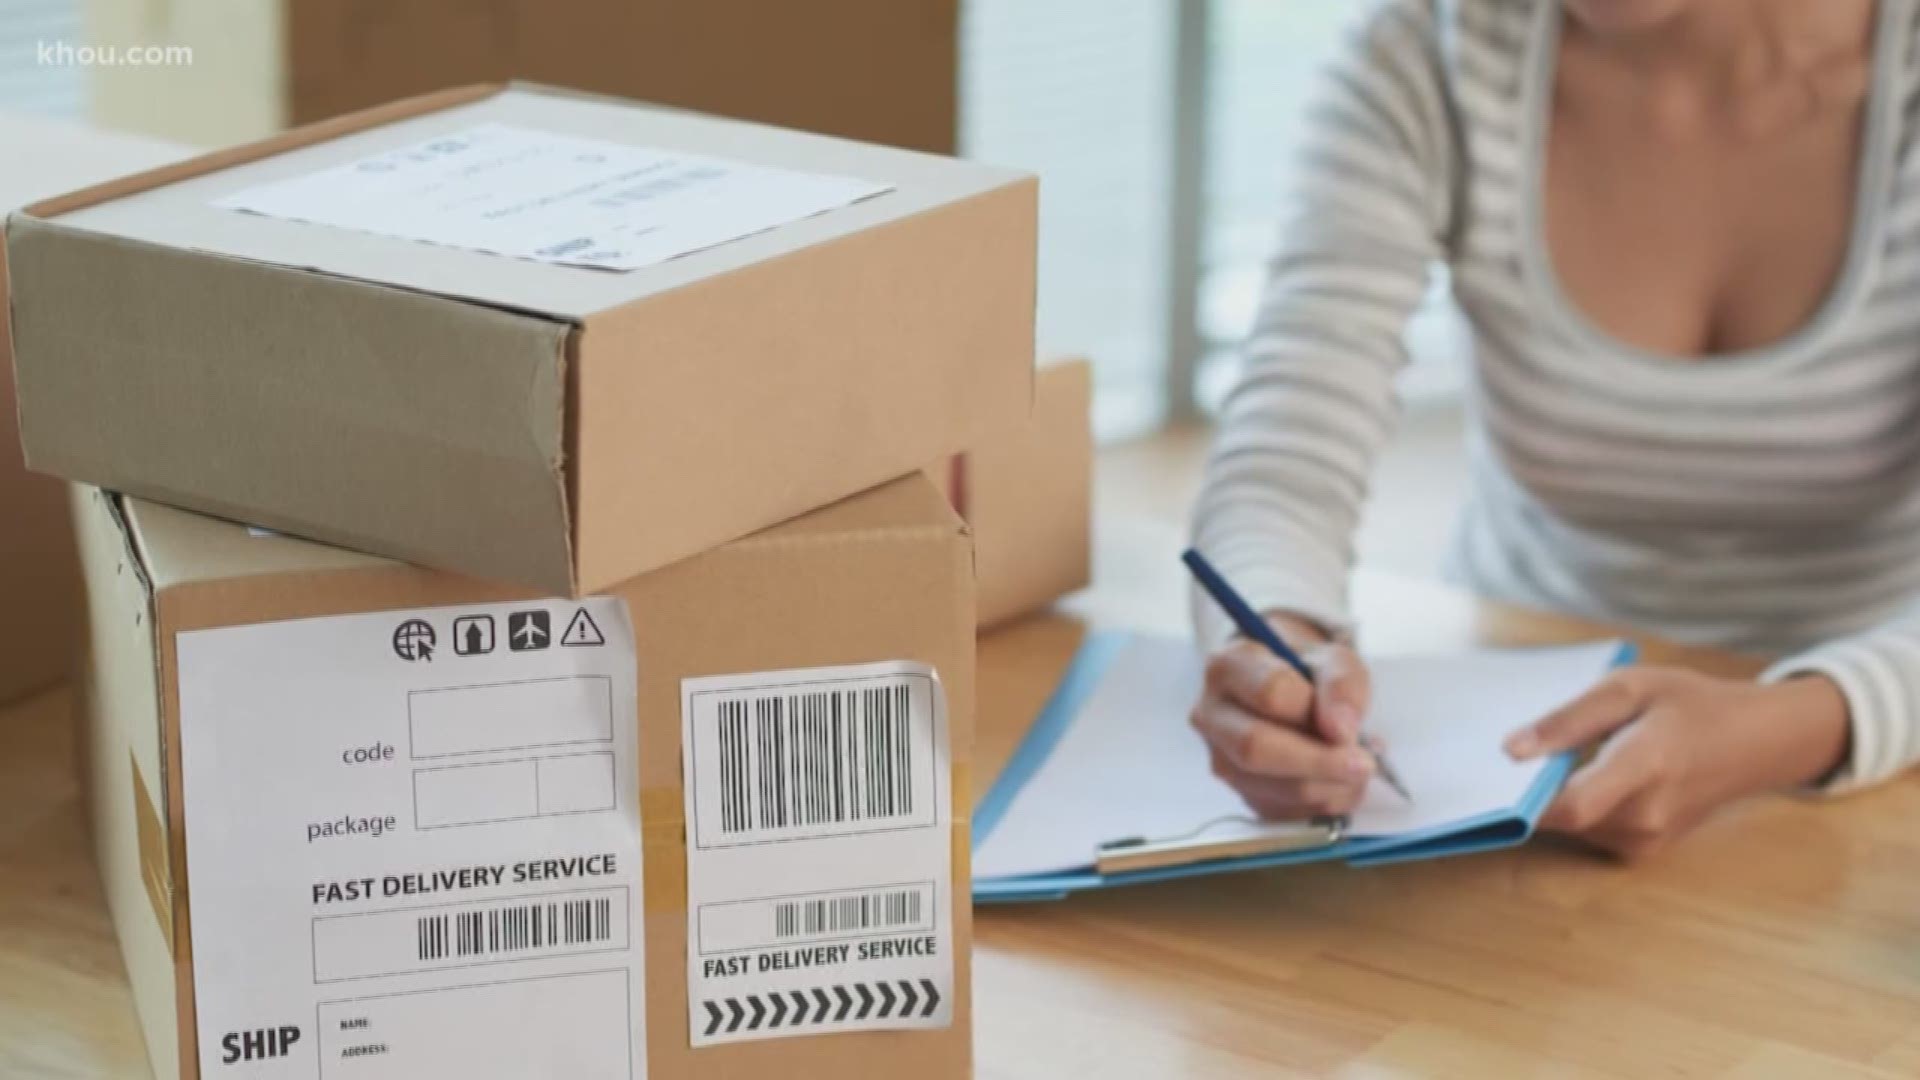 With so many people turning to delivery services for food, groceries and other necessities, it's important to know how to handle packages during this pandemic.